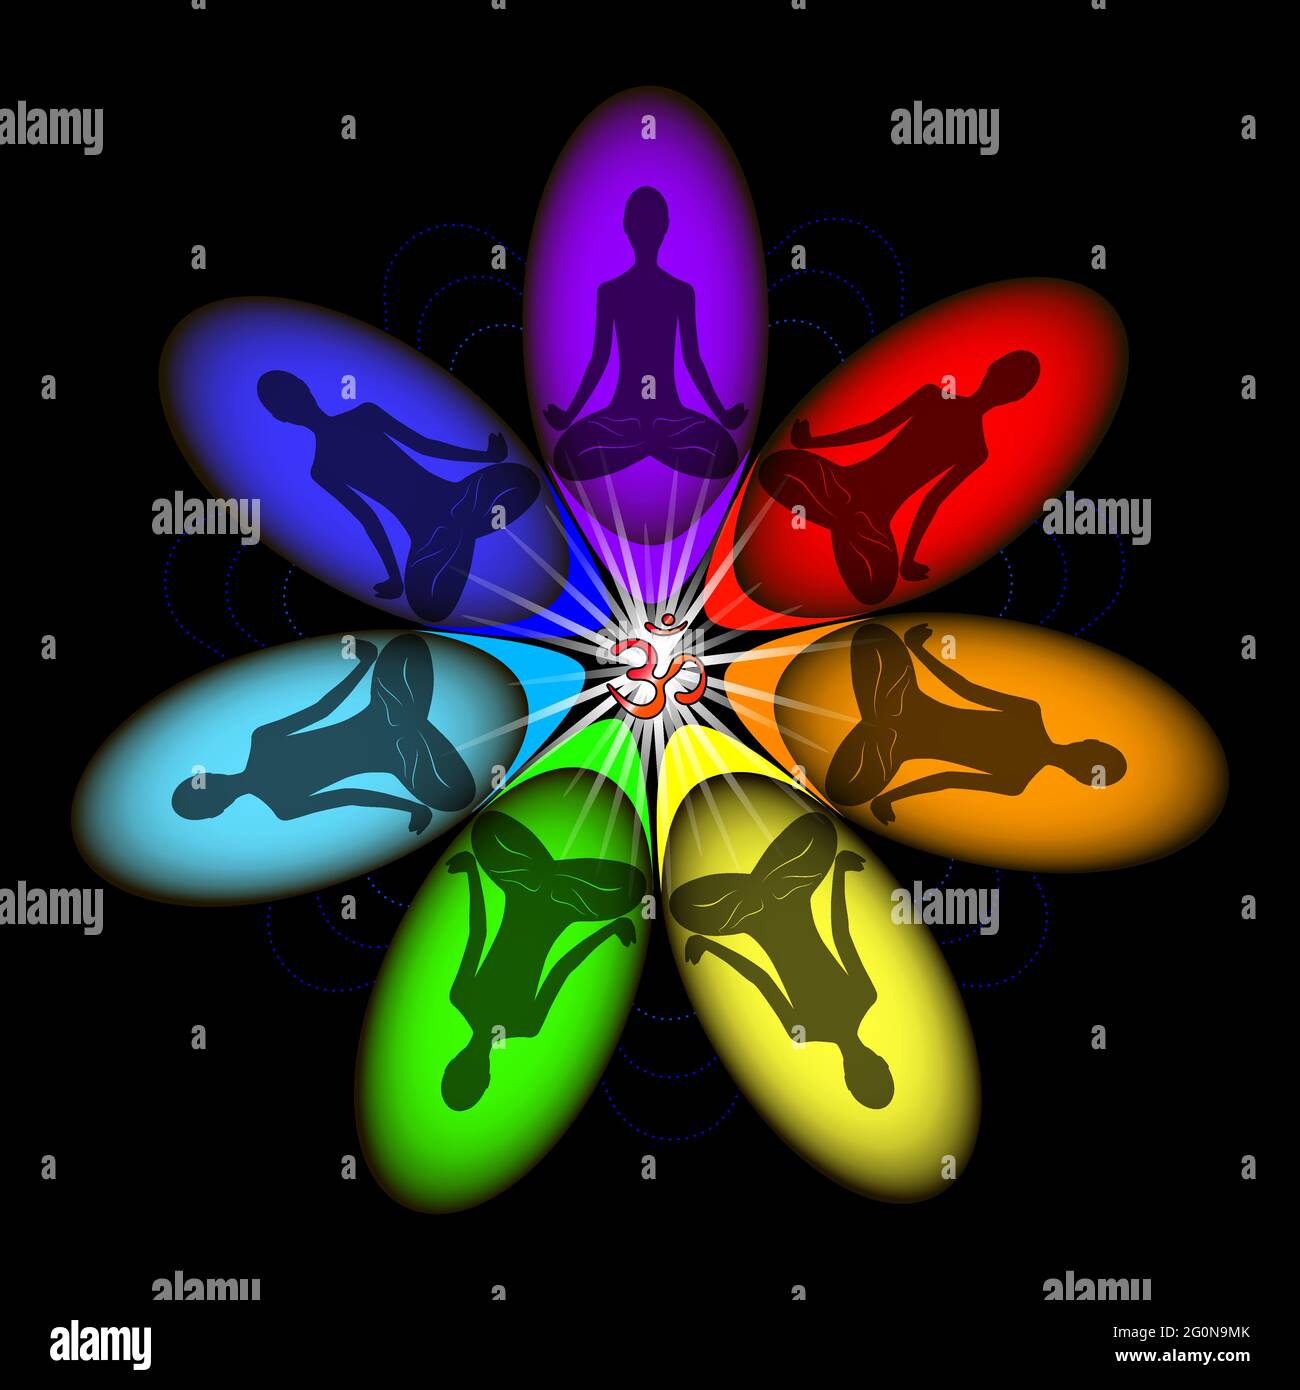 Chakra System Images